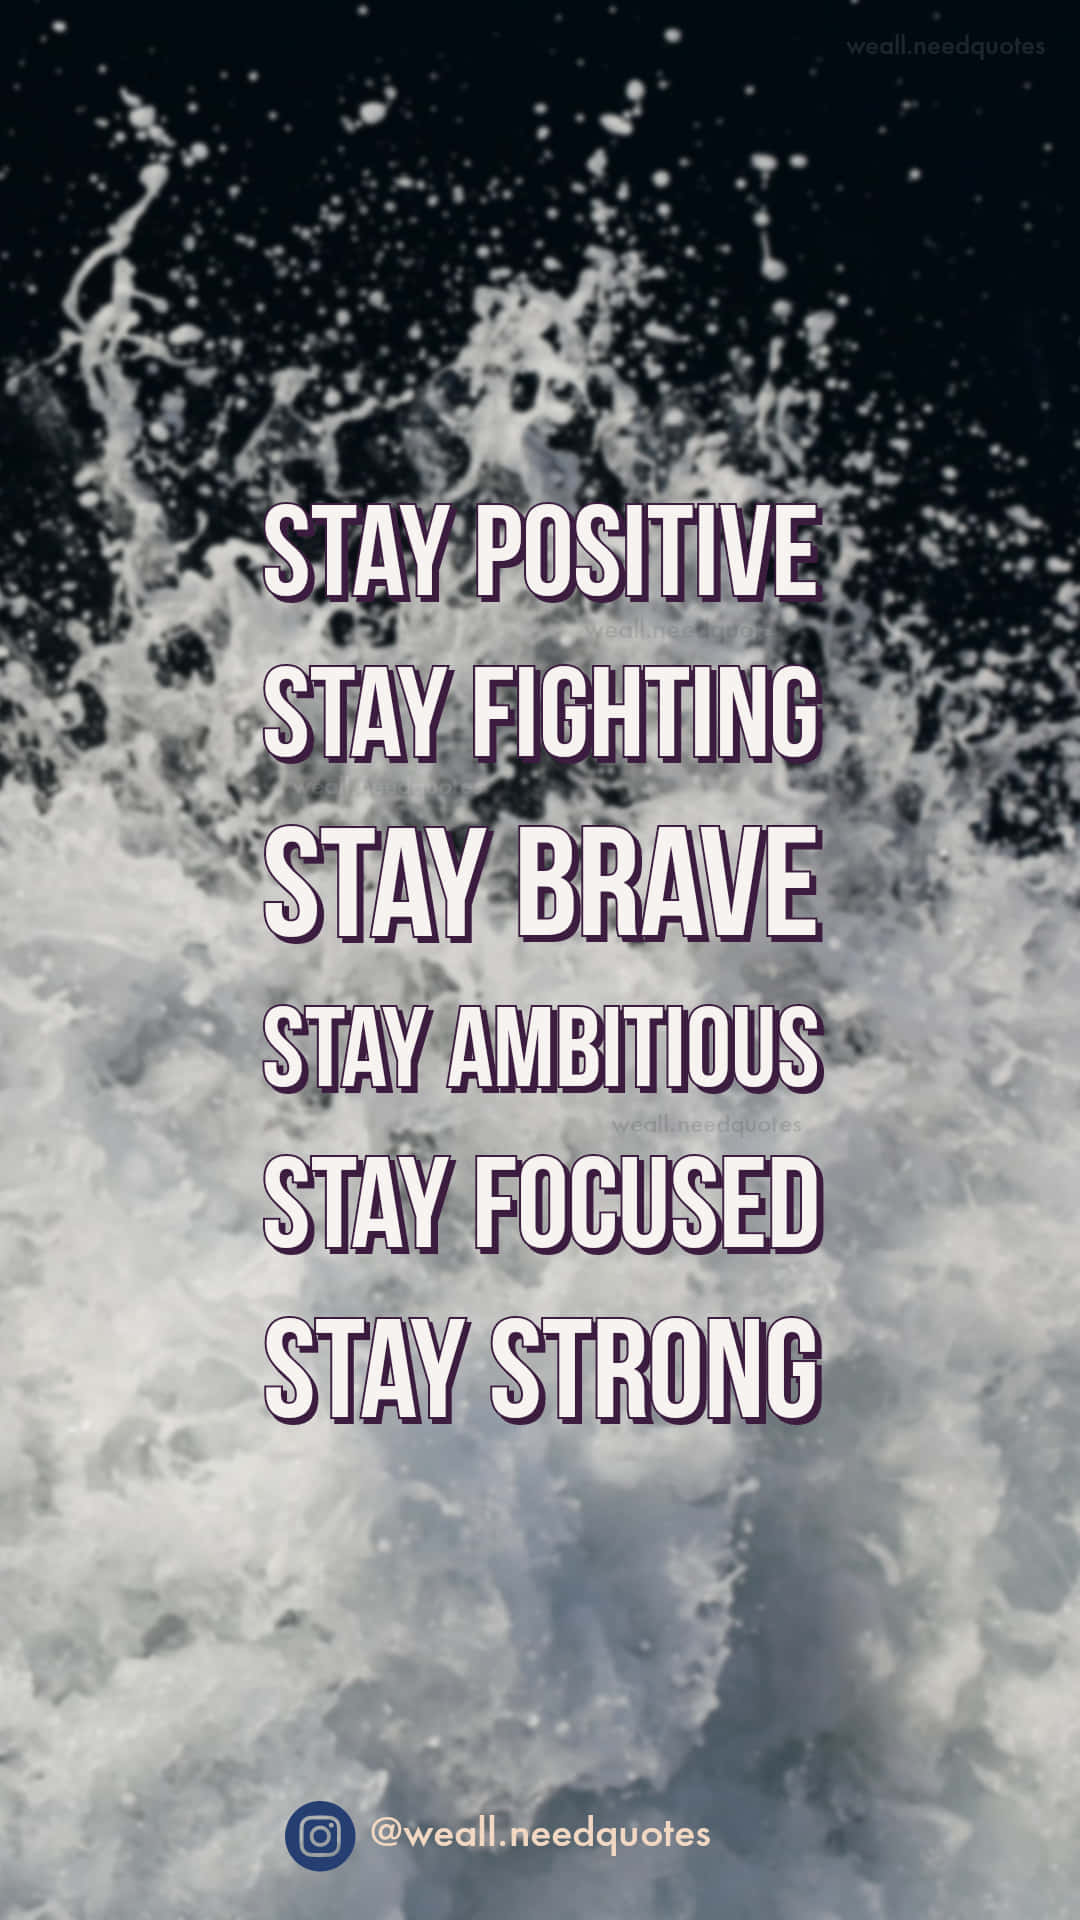 Stay Positive and Face Challenges with Courage and Optimism Wallpaper